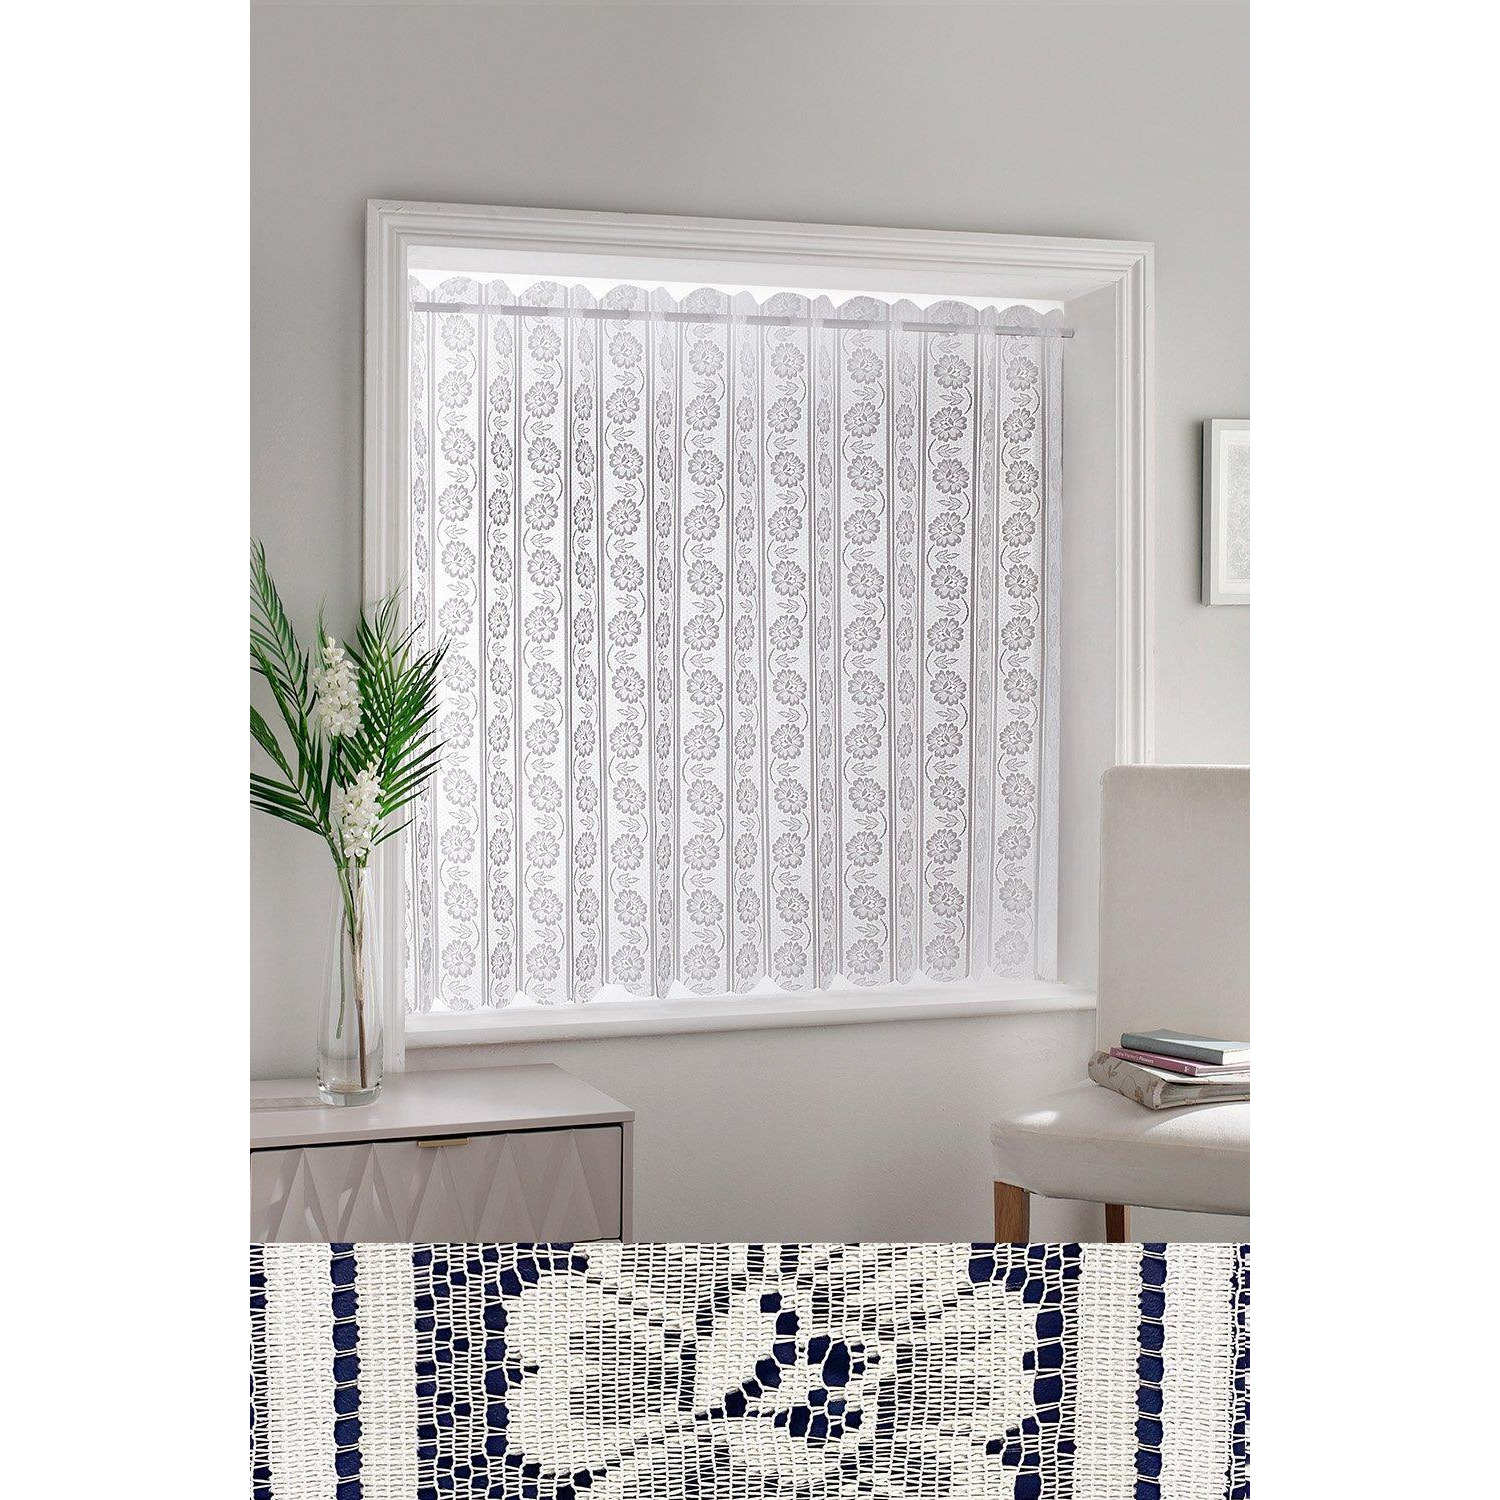 White Floral Textured Voile Louvre Vertical Pleated Window Blind Panel - image 1